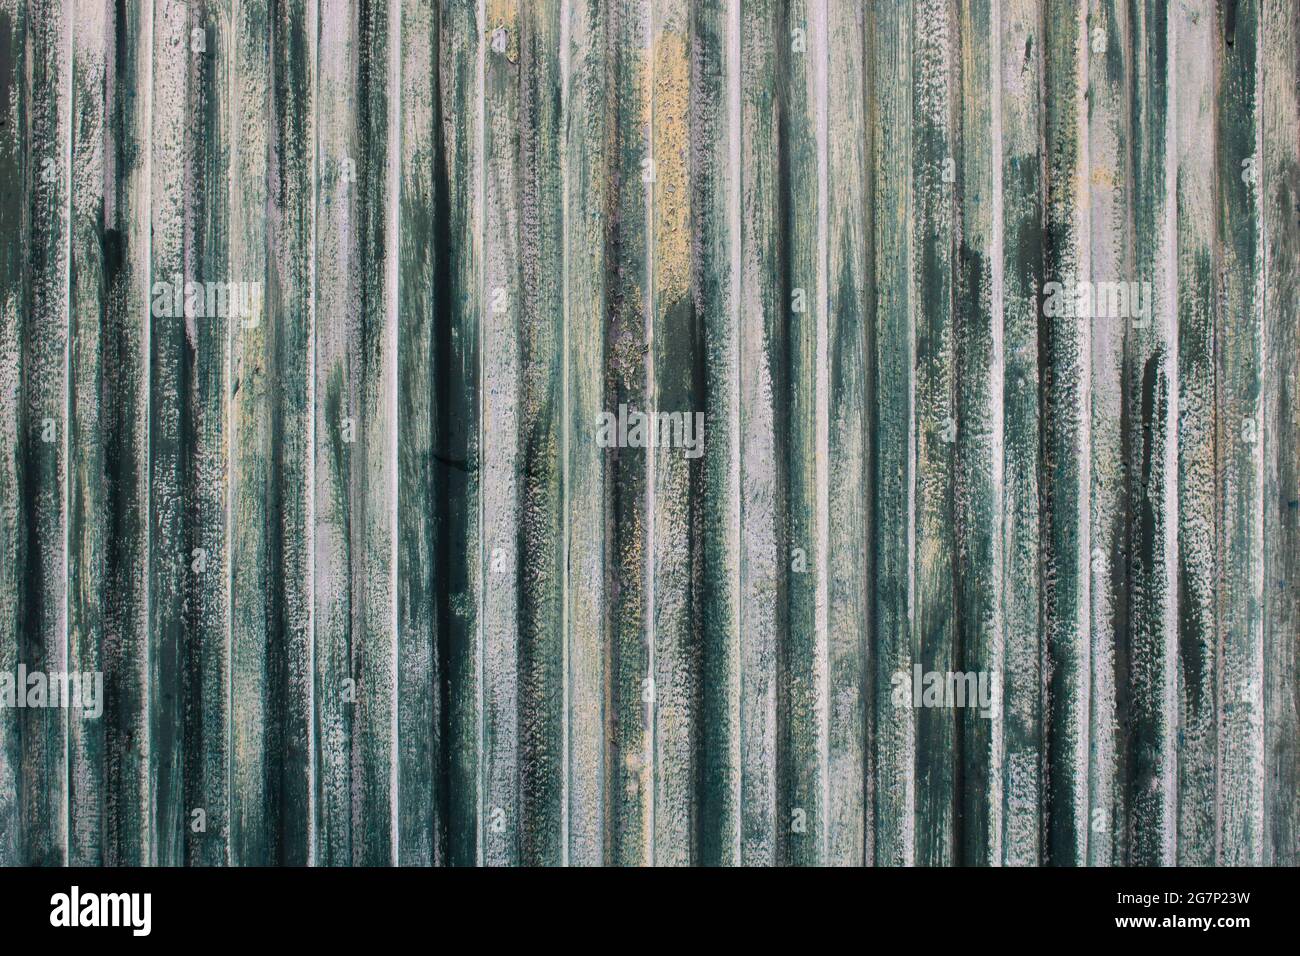 Texture of rusty metal surface with vertical stripes or slats and cracked paint in tones of green, white and yellow. Old weathered gate background Stock Photo